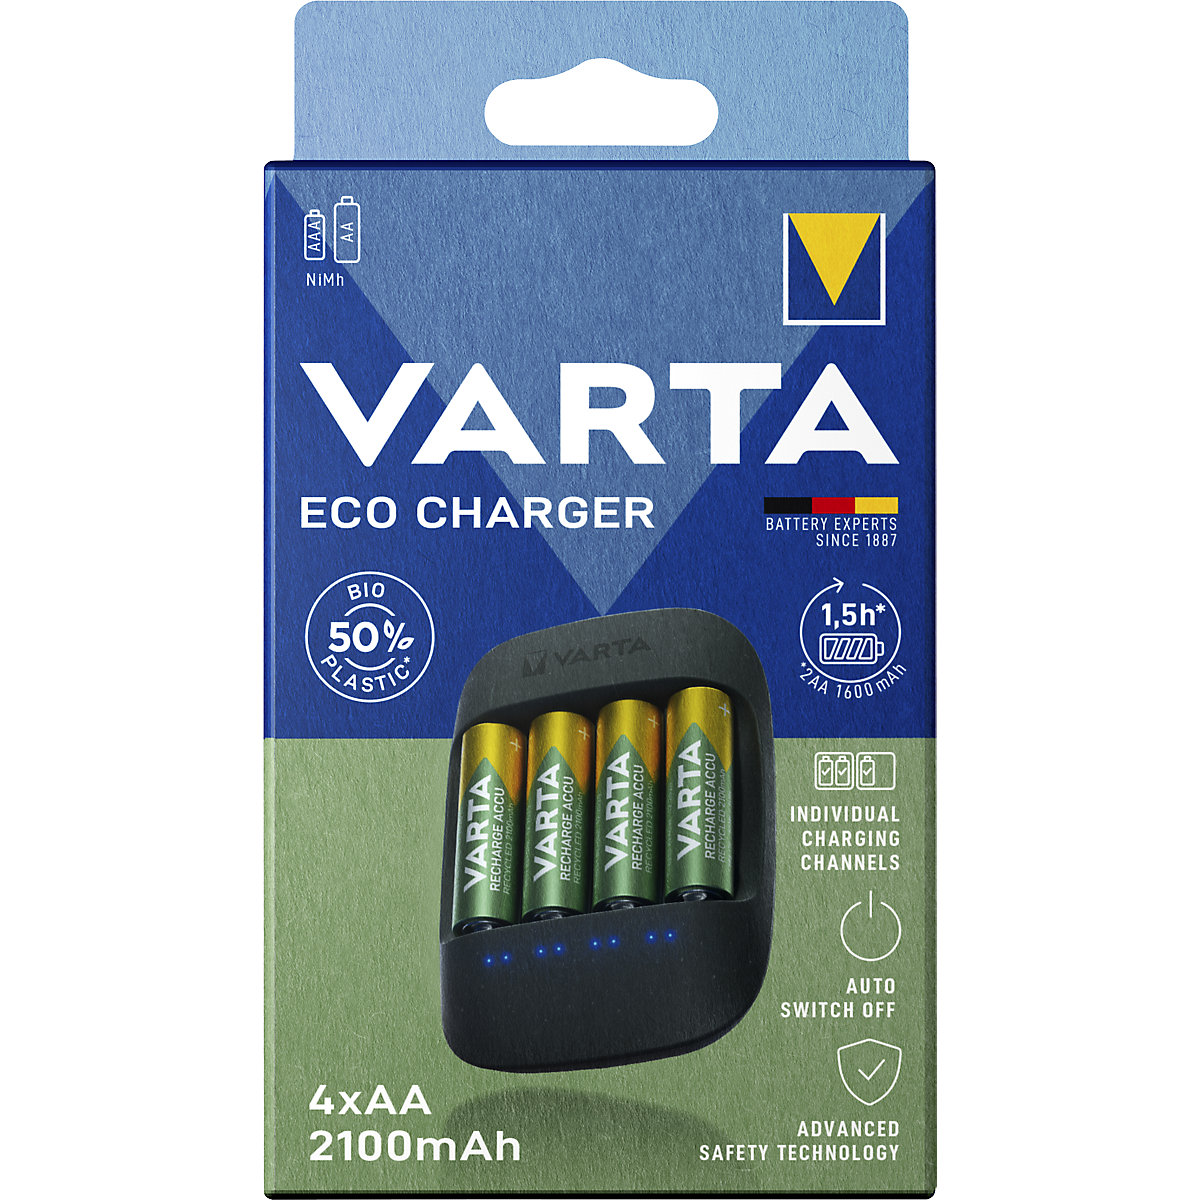 ECO CHARGER charger - VARTA